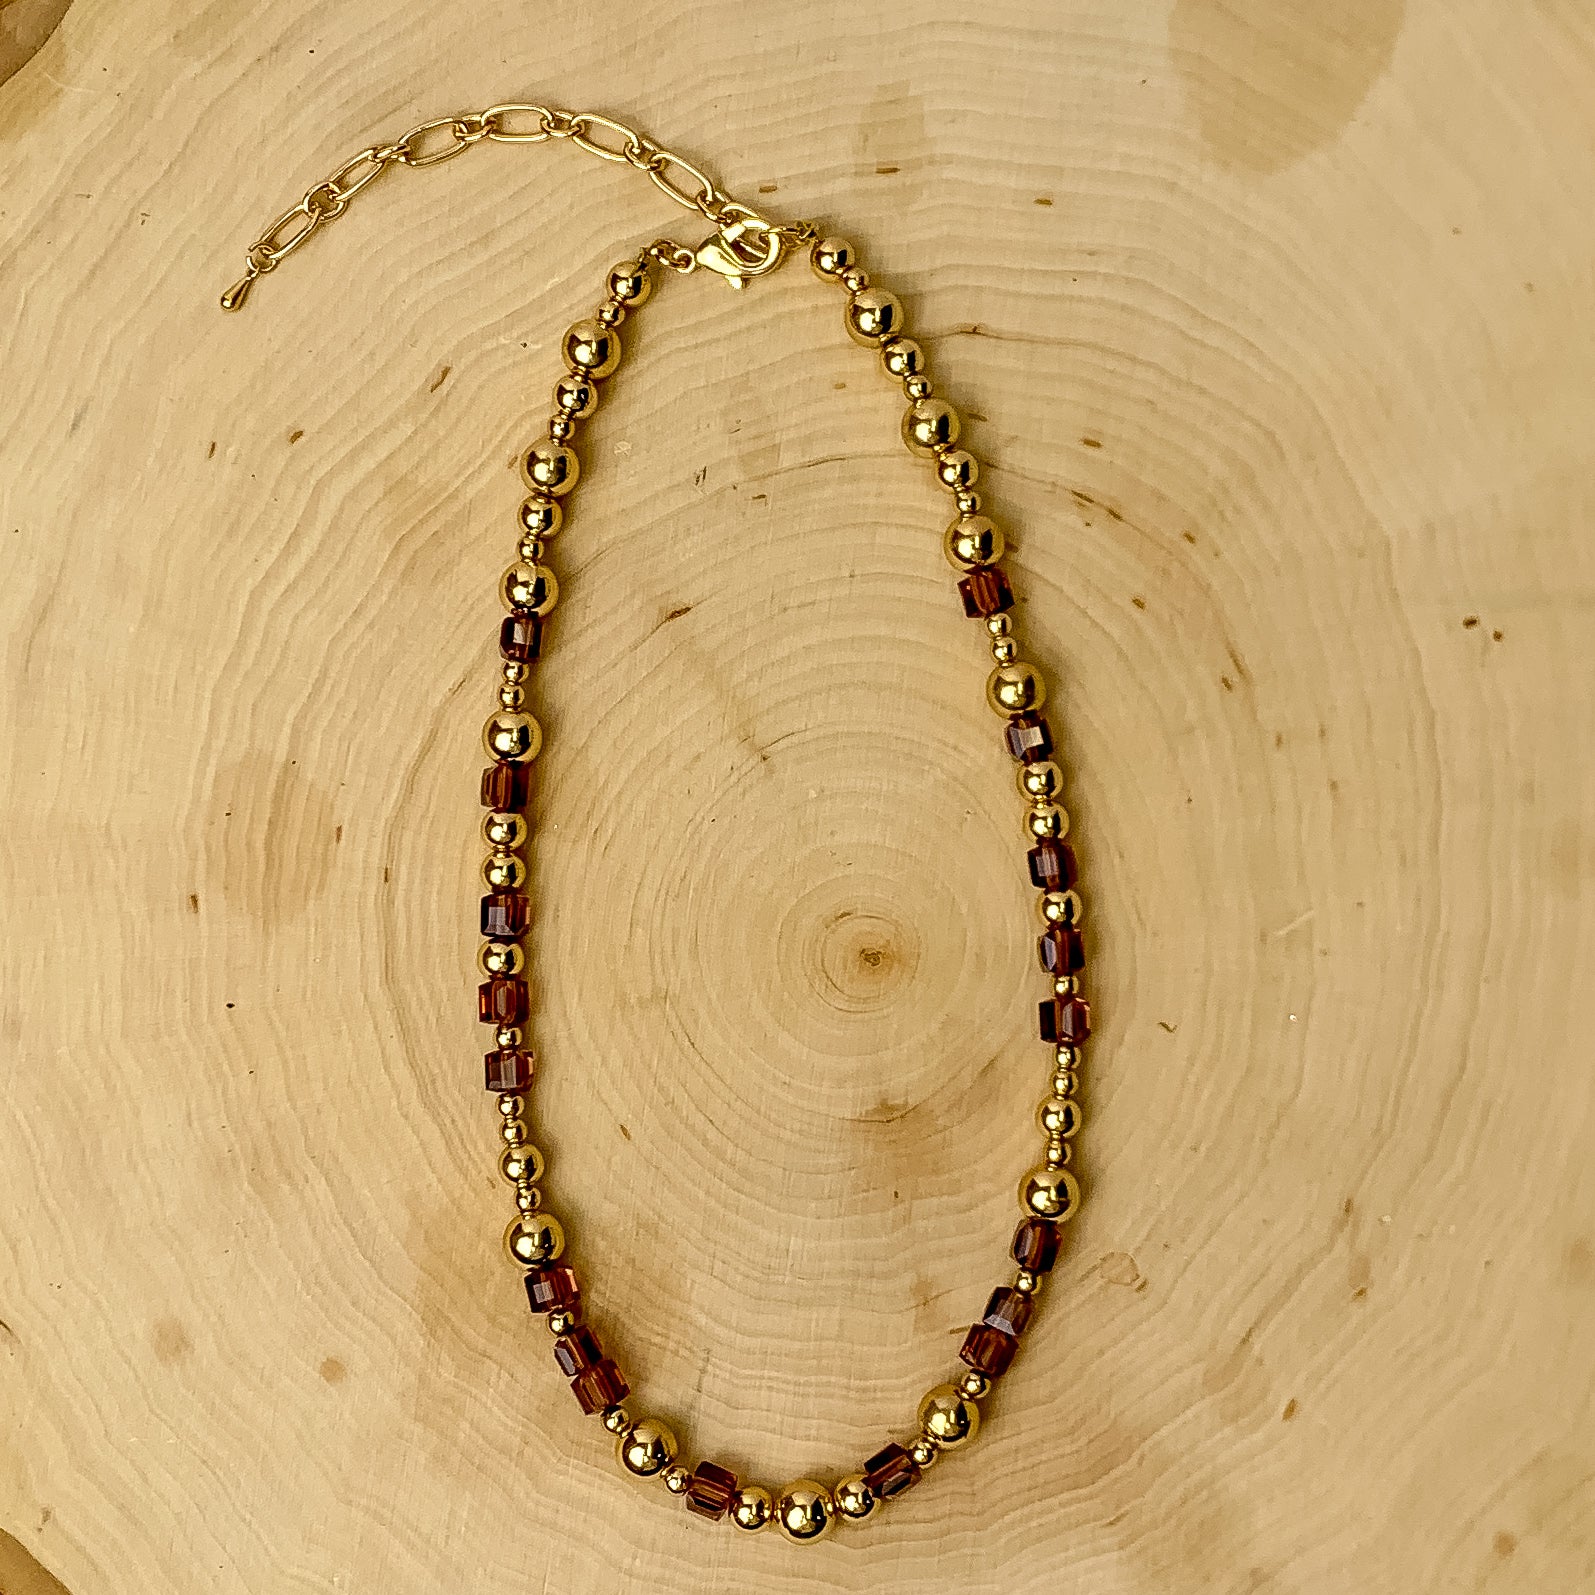 This necklace has gold tone and grape purple beads. It is placed against a wooden background.